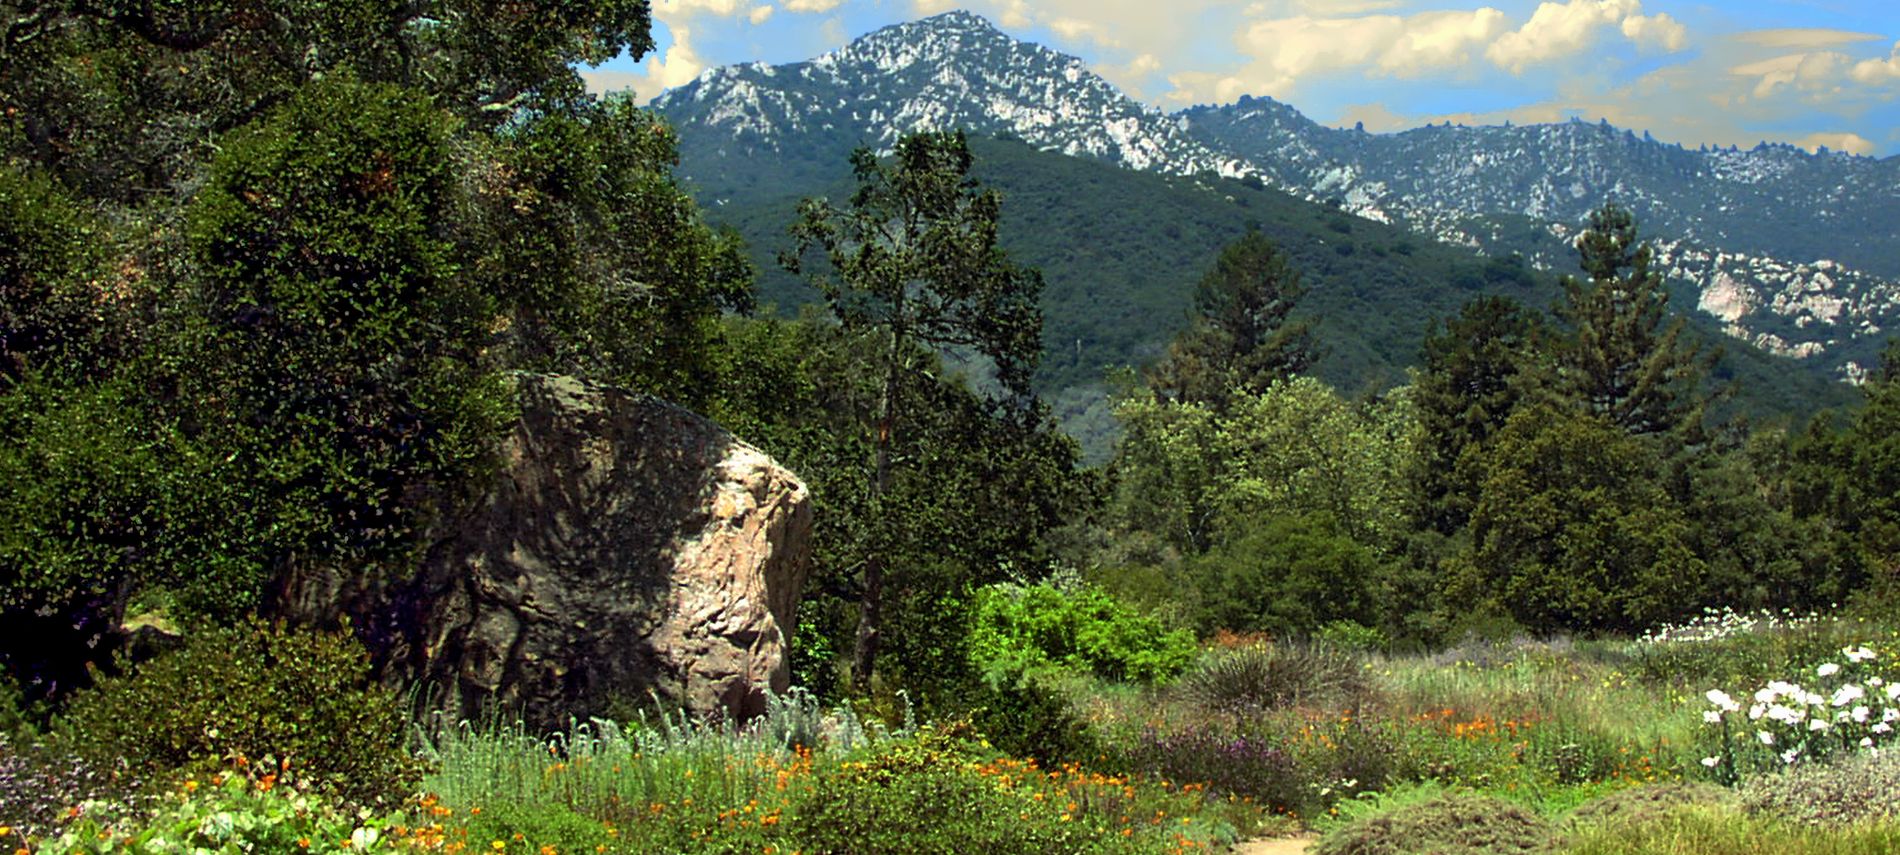 View of the mountains and natural landscape in the Santa Barbara Botanic Garden.